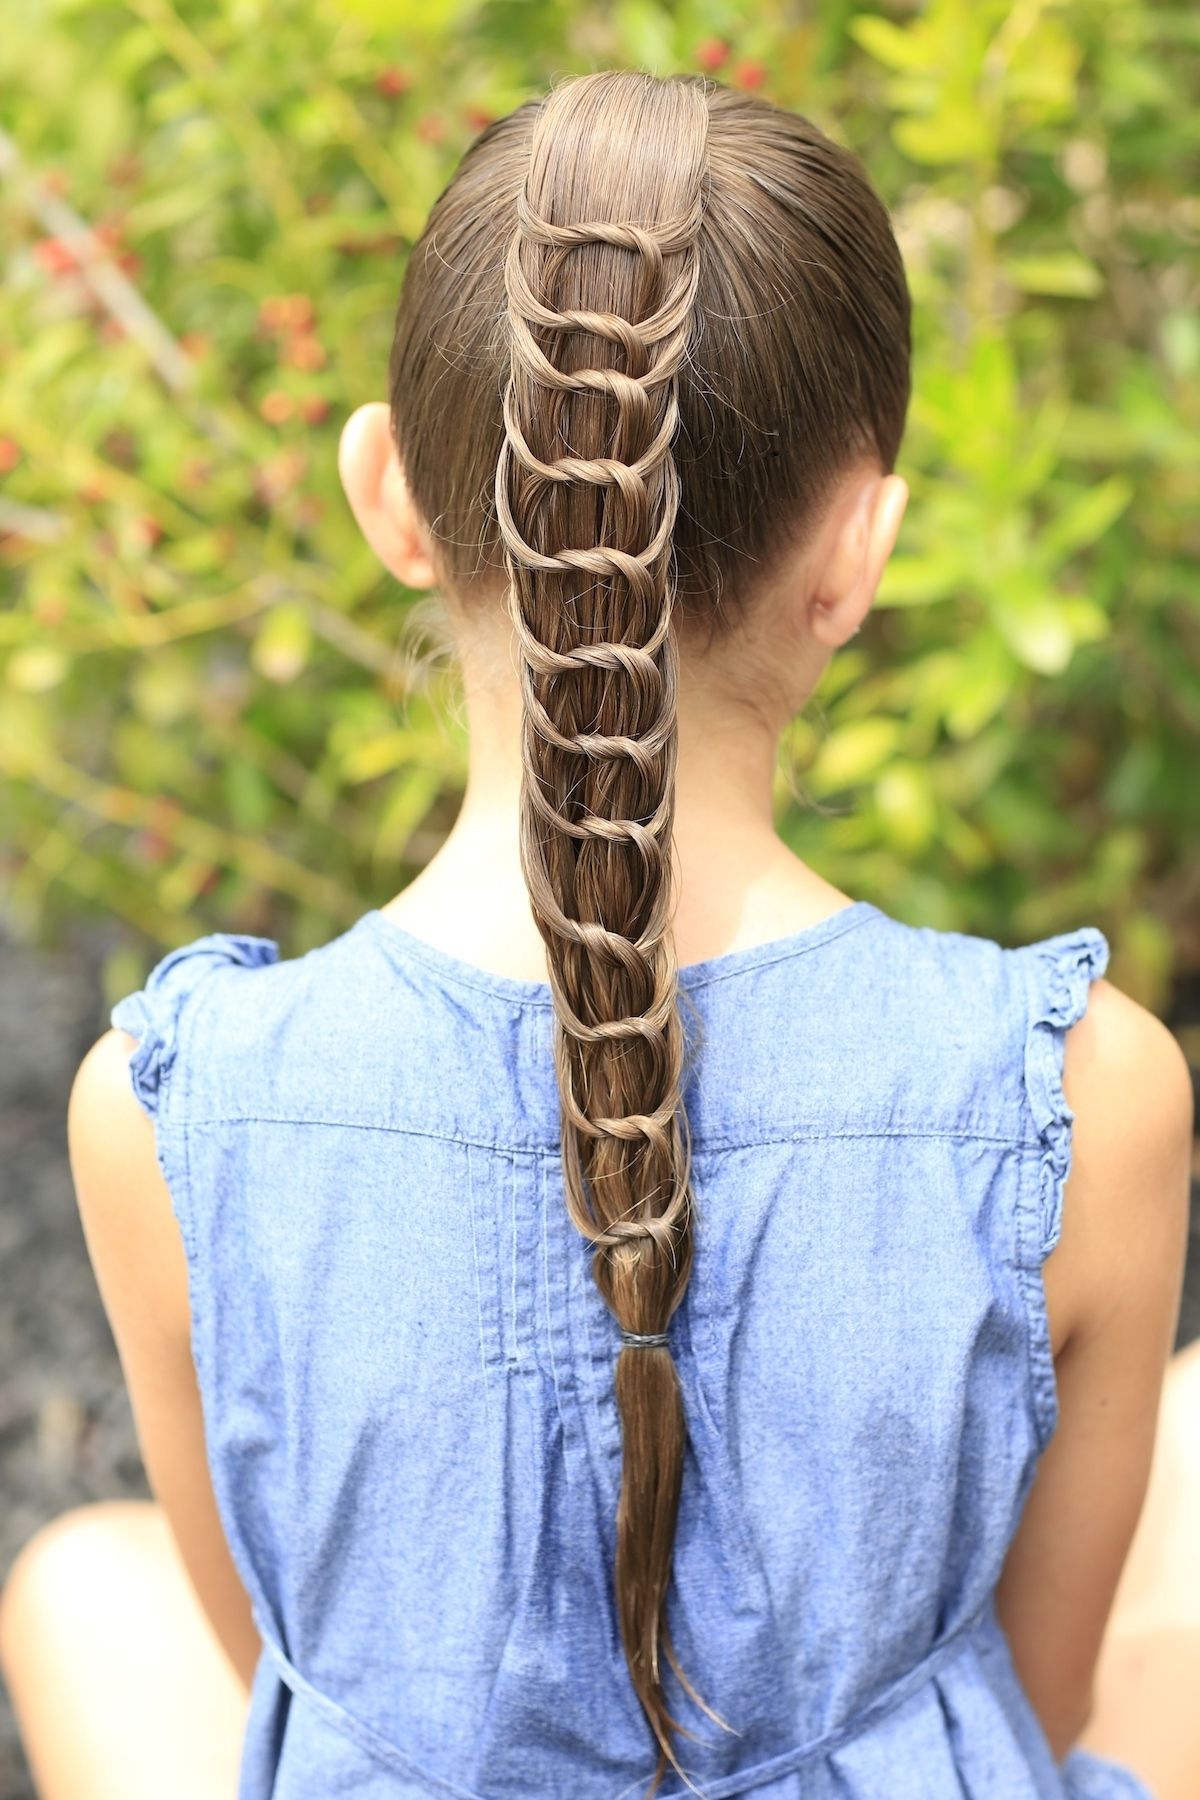 Cute Girls Hairstyles Throughout Current Knotted Ponytail Hairstyles (View 1 of 20)